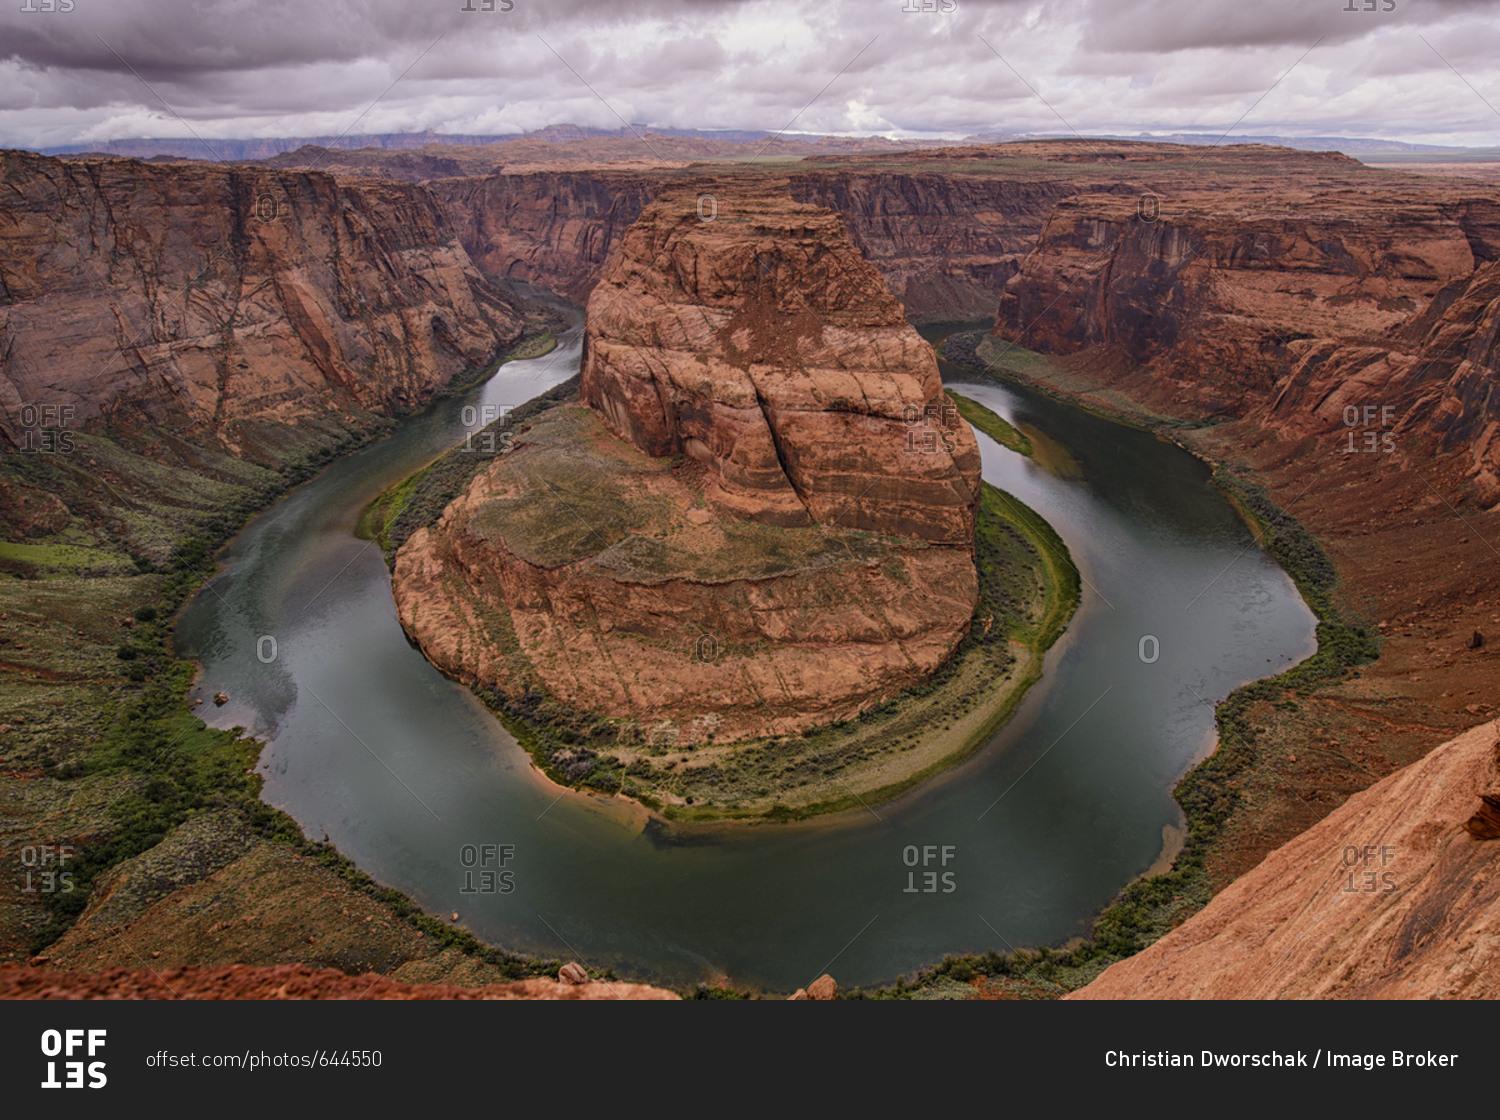 Horseshoe Bend, bend of the Colorado River, King Bend, Glen Canyon National Recreation Area, Page, Arizona, USA, North America